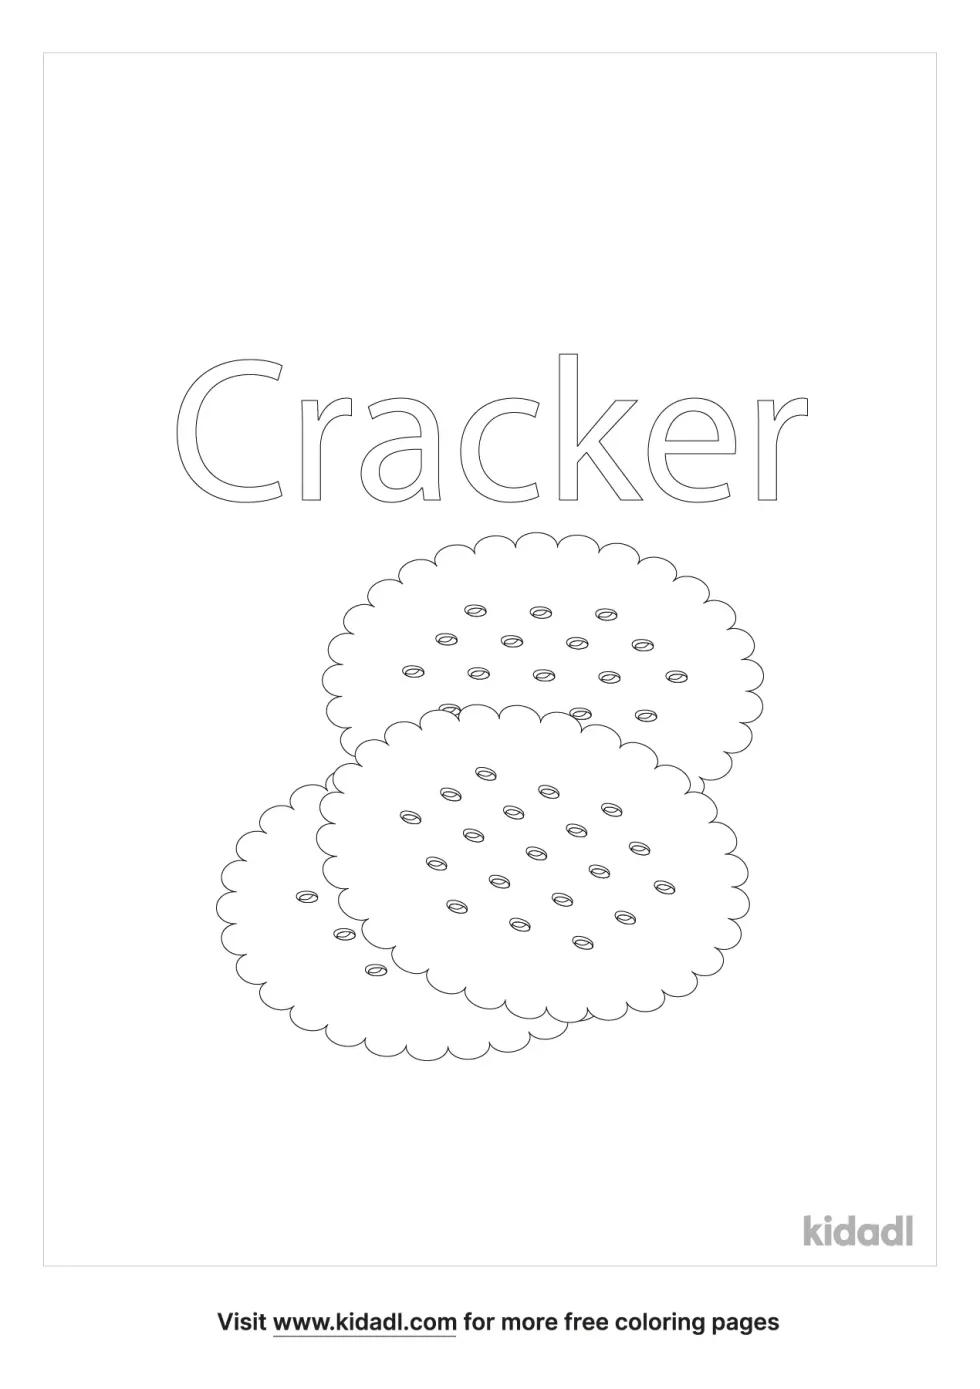 Cracker Coloring Page